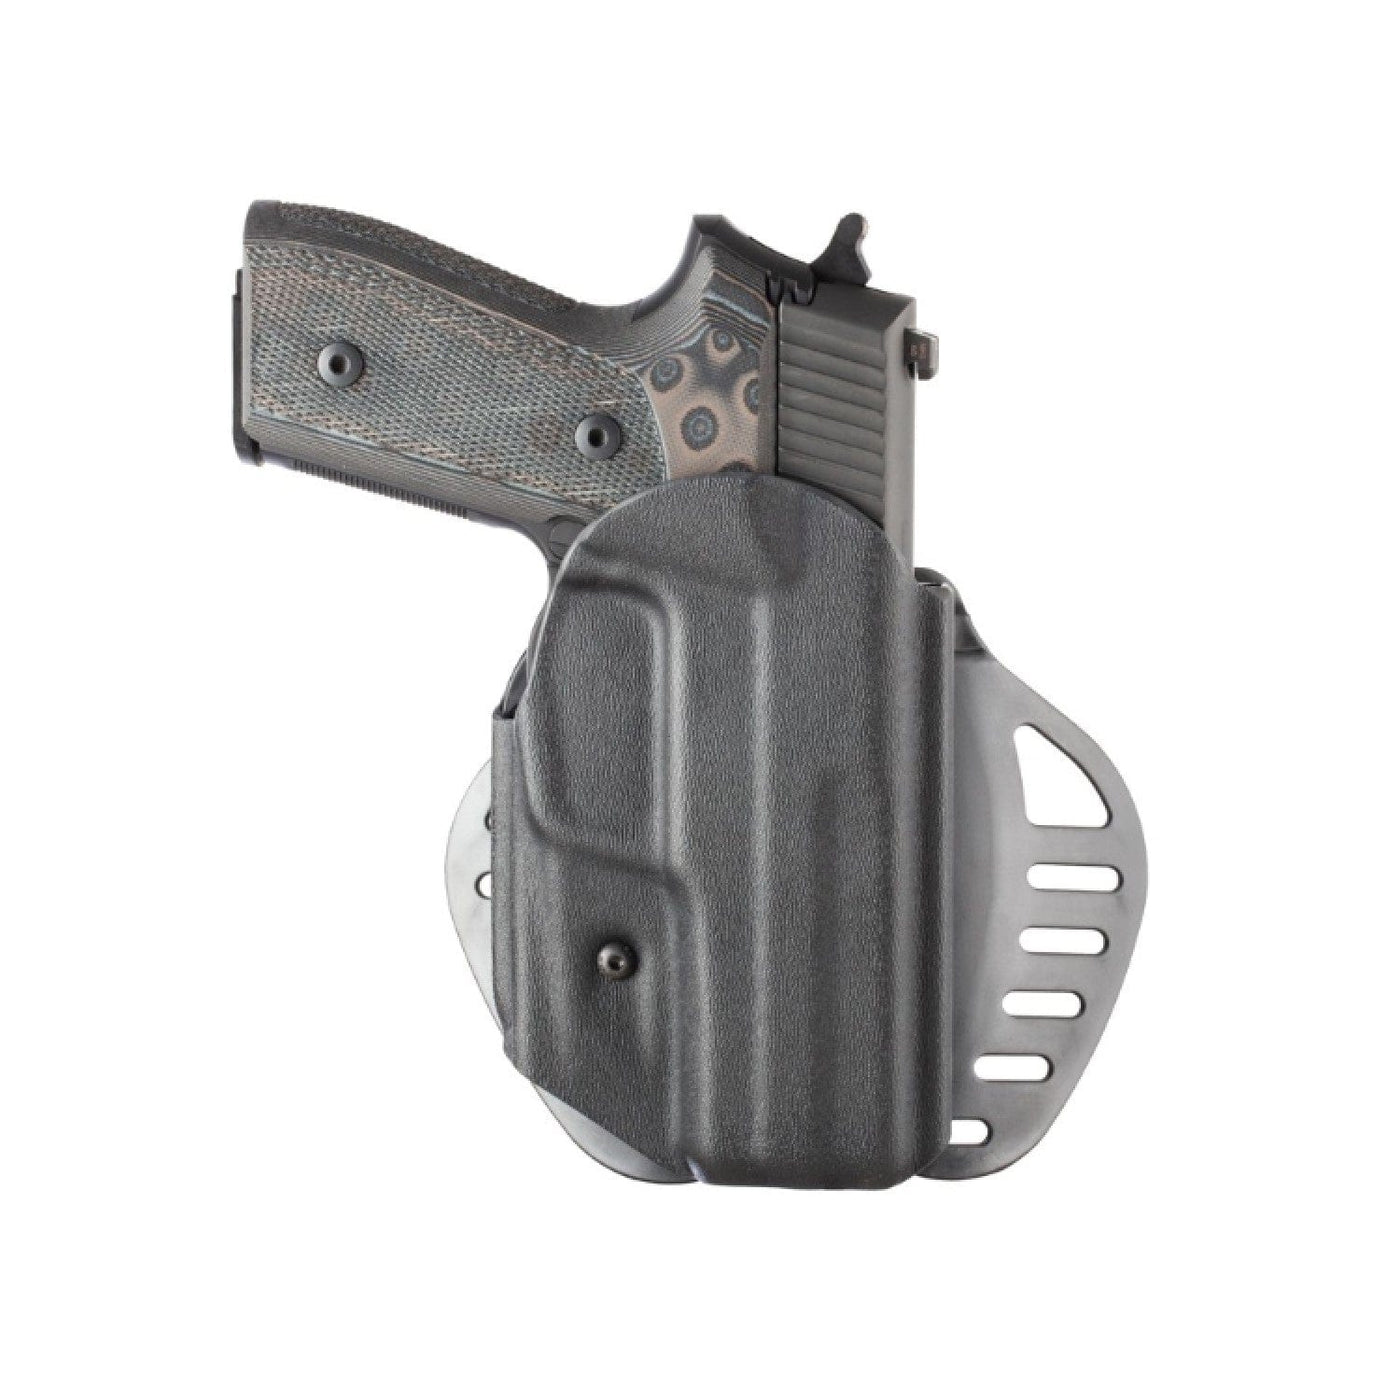 Hogue Hogue ARS Stage 1 Carry Holster Sig Sauer P225A1 Black Right hand Shooting